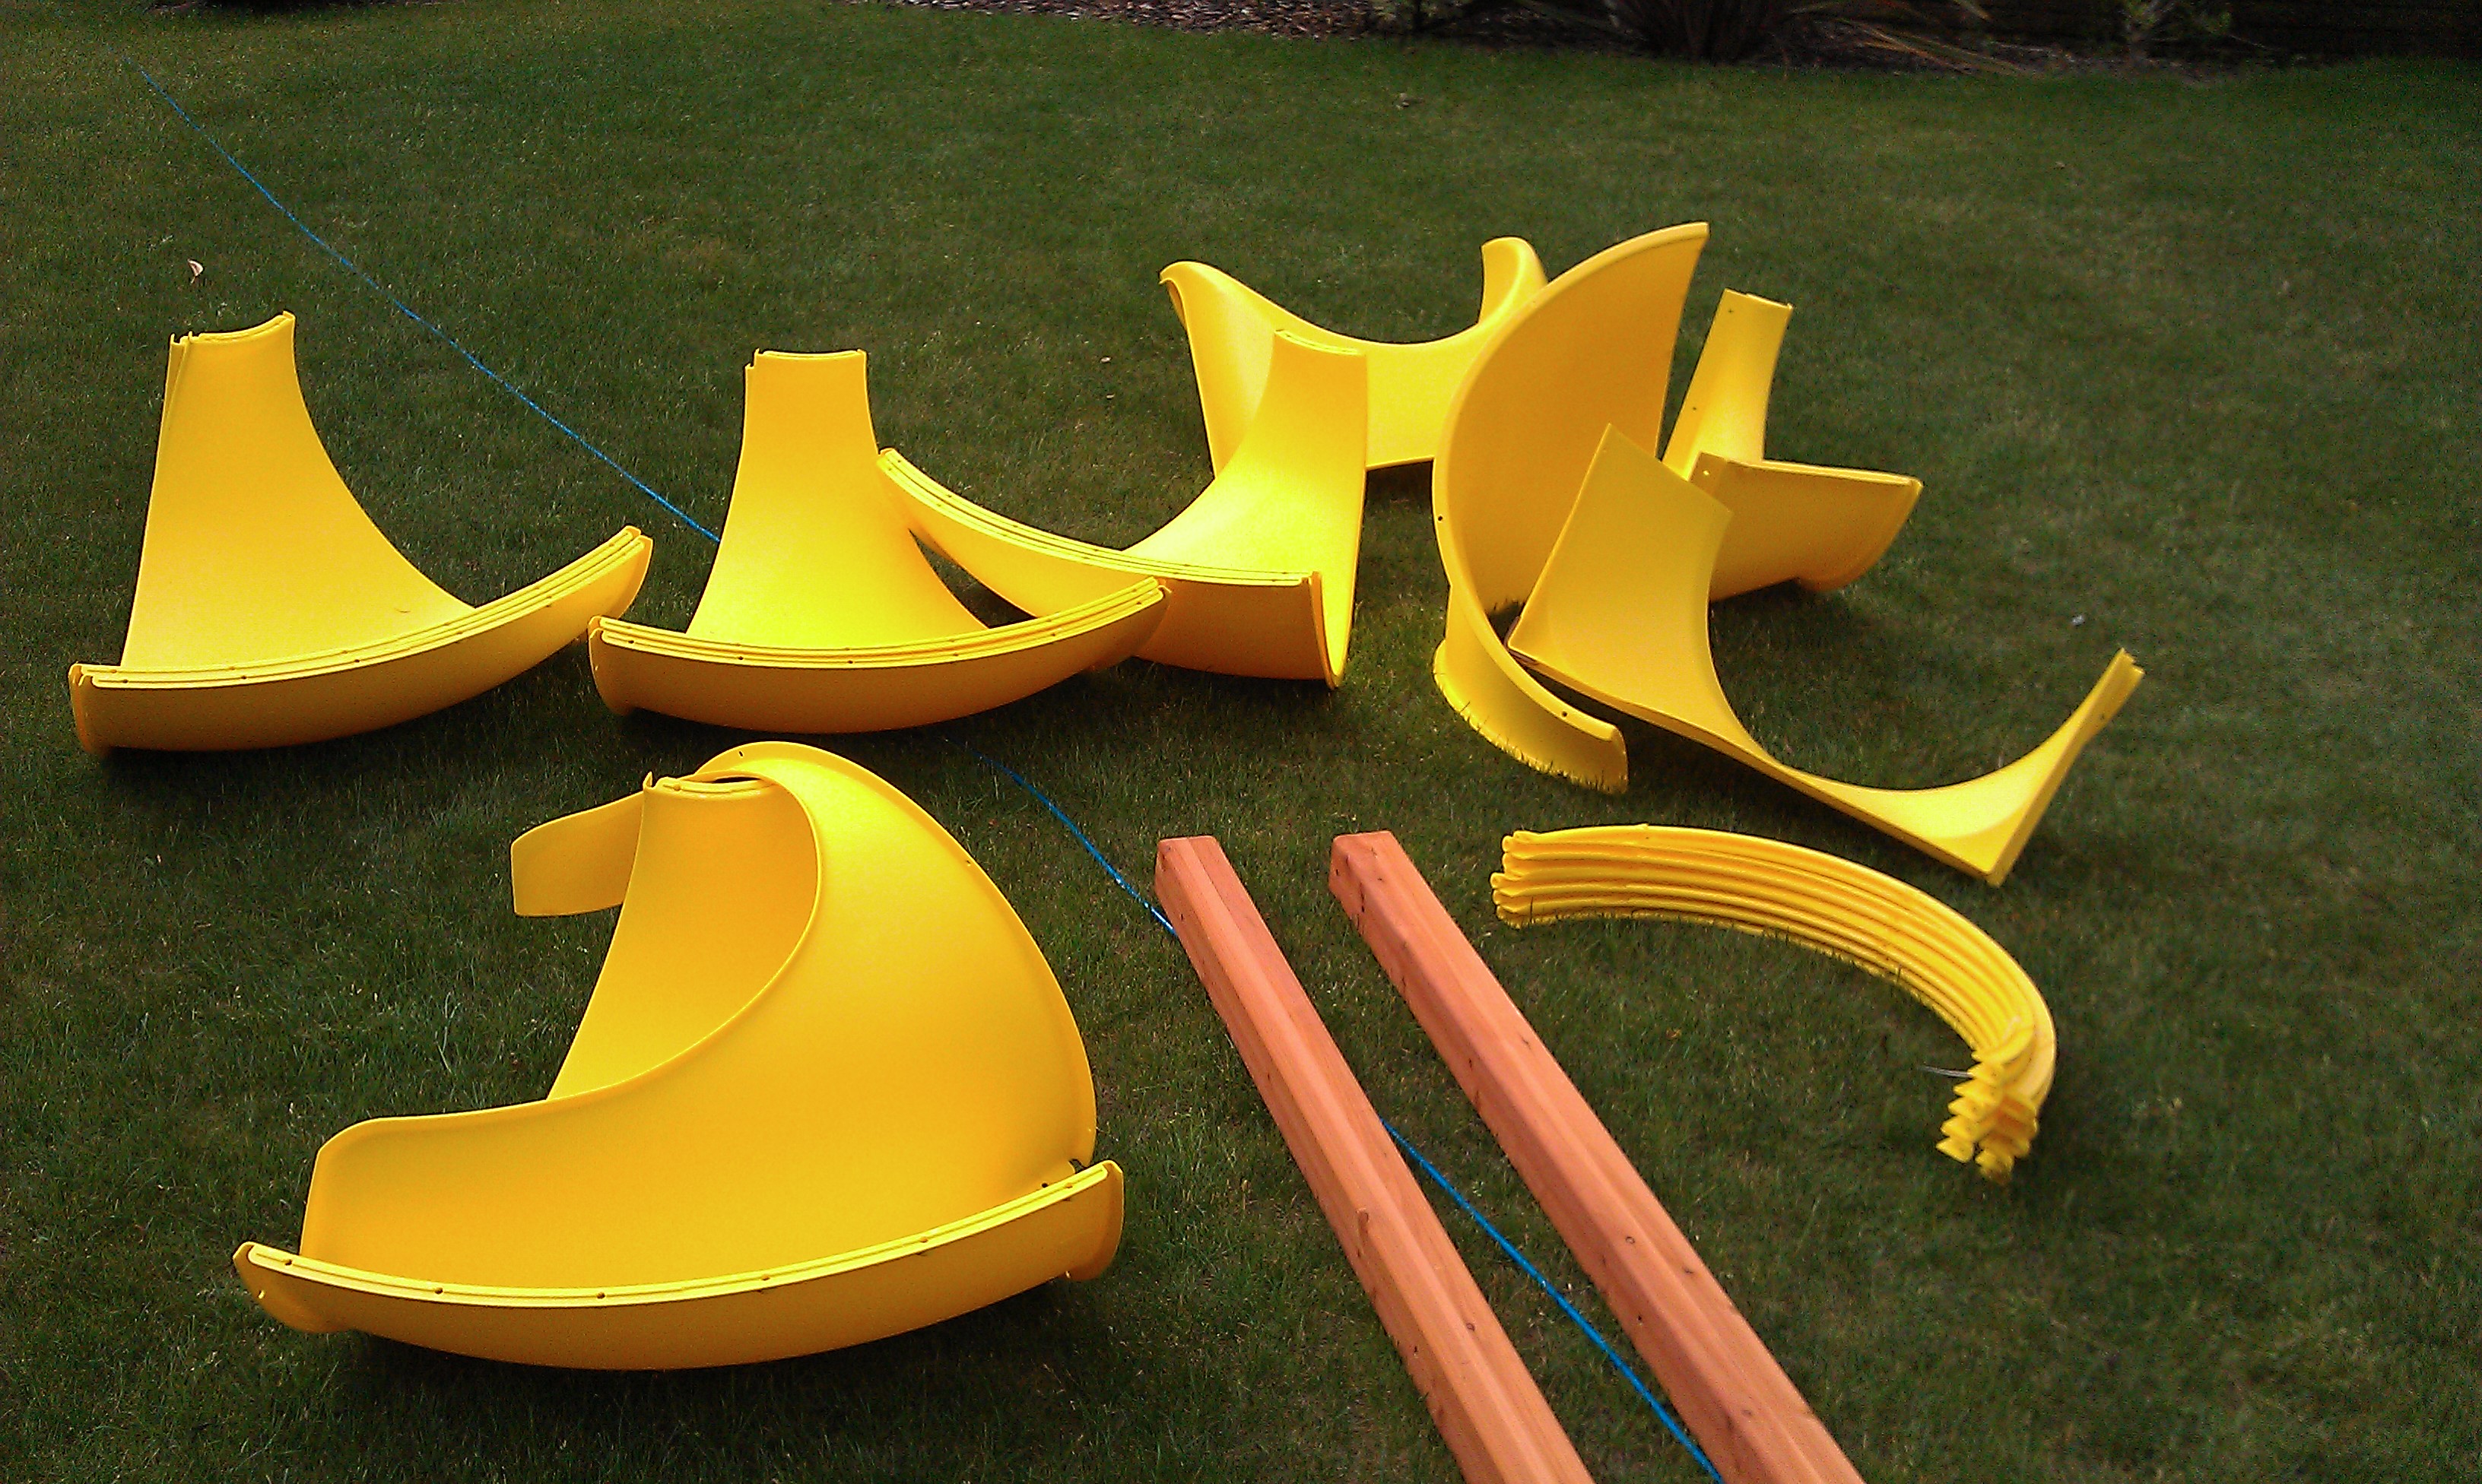 Building Enclosed Tube Slides for Selwood Climbing Frames